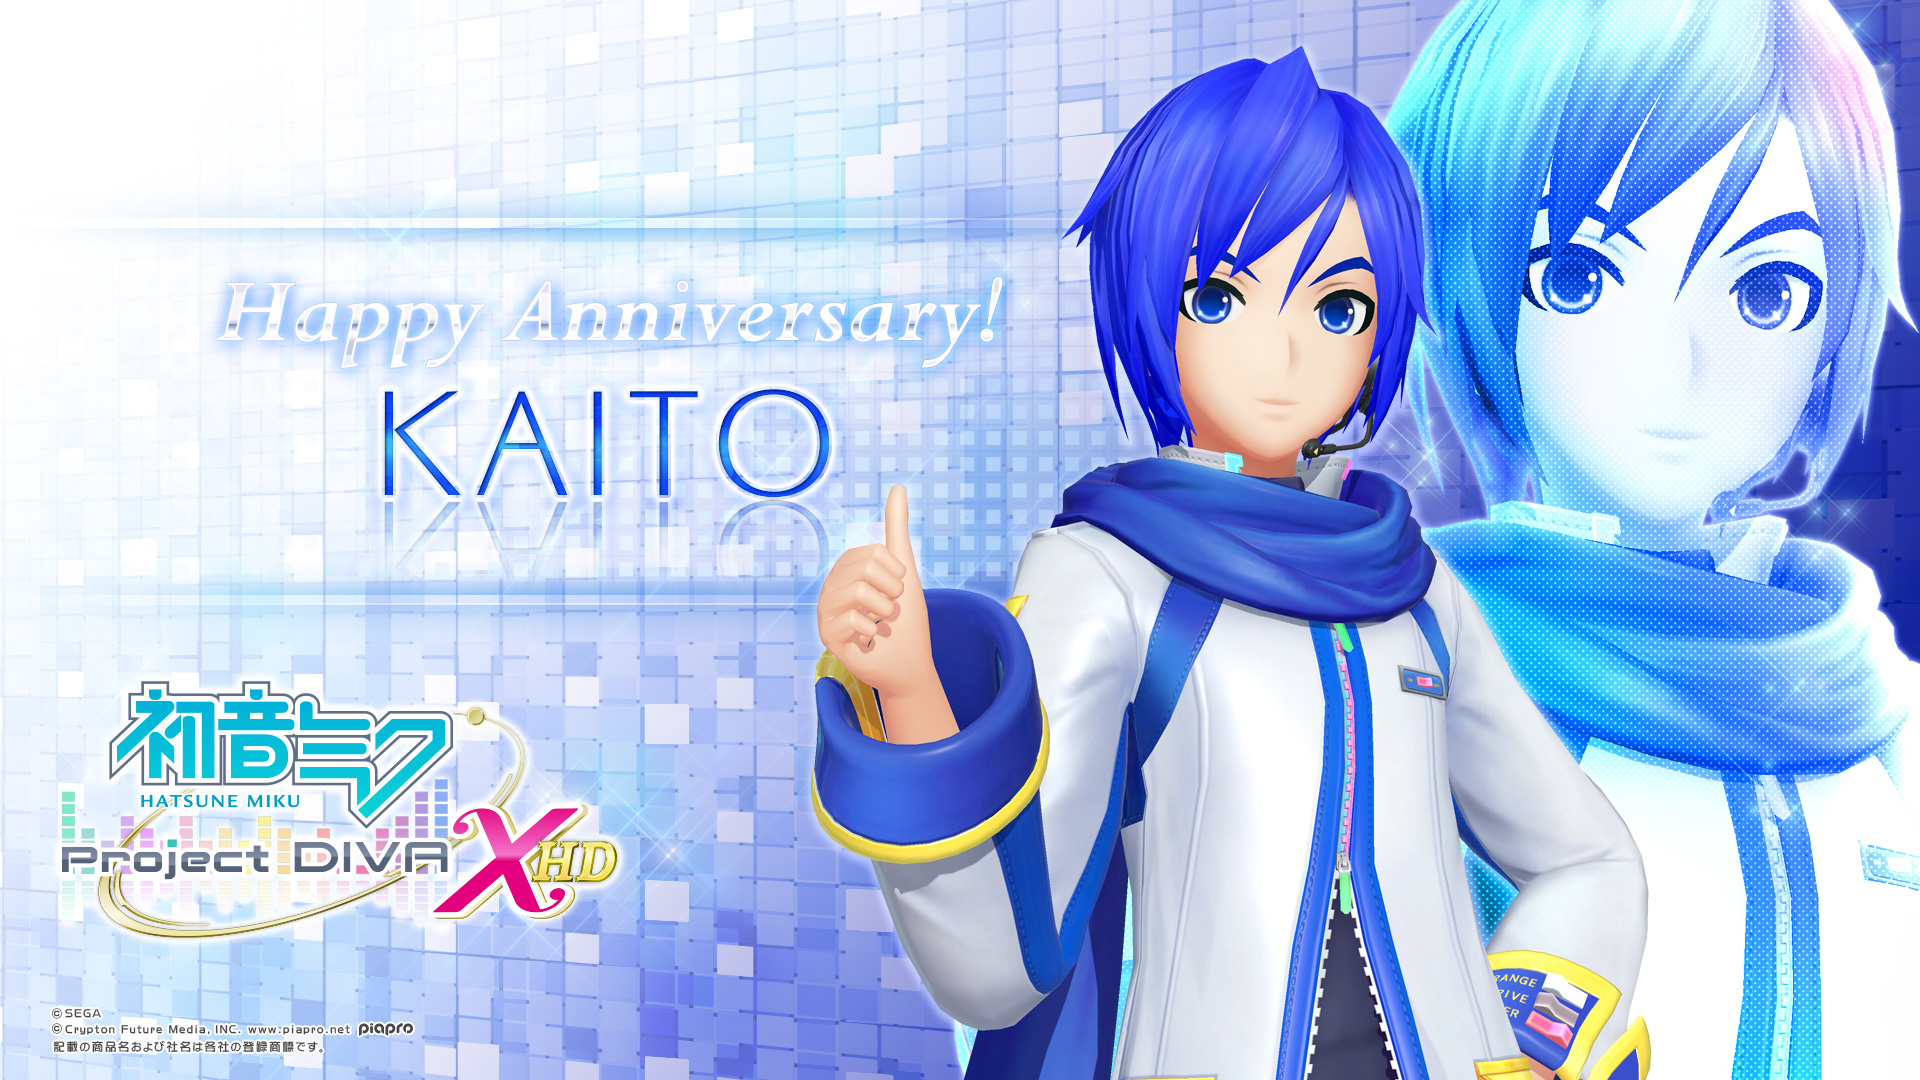 1920x1080 KAITO Anniversary Celebrations: Free Wallpapers, Song Recommendations, and More! VNN